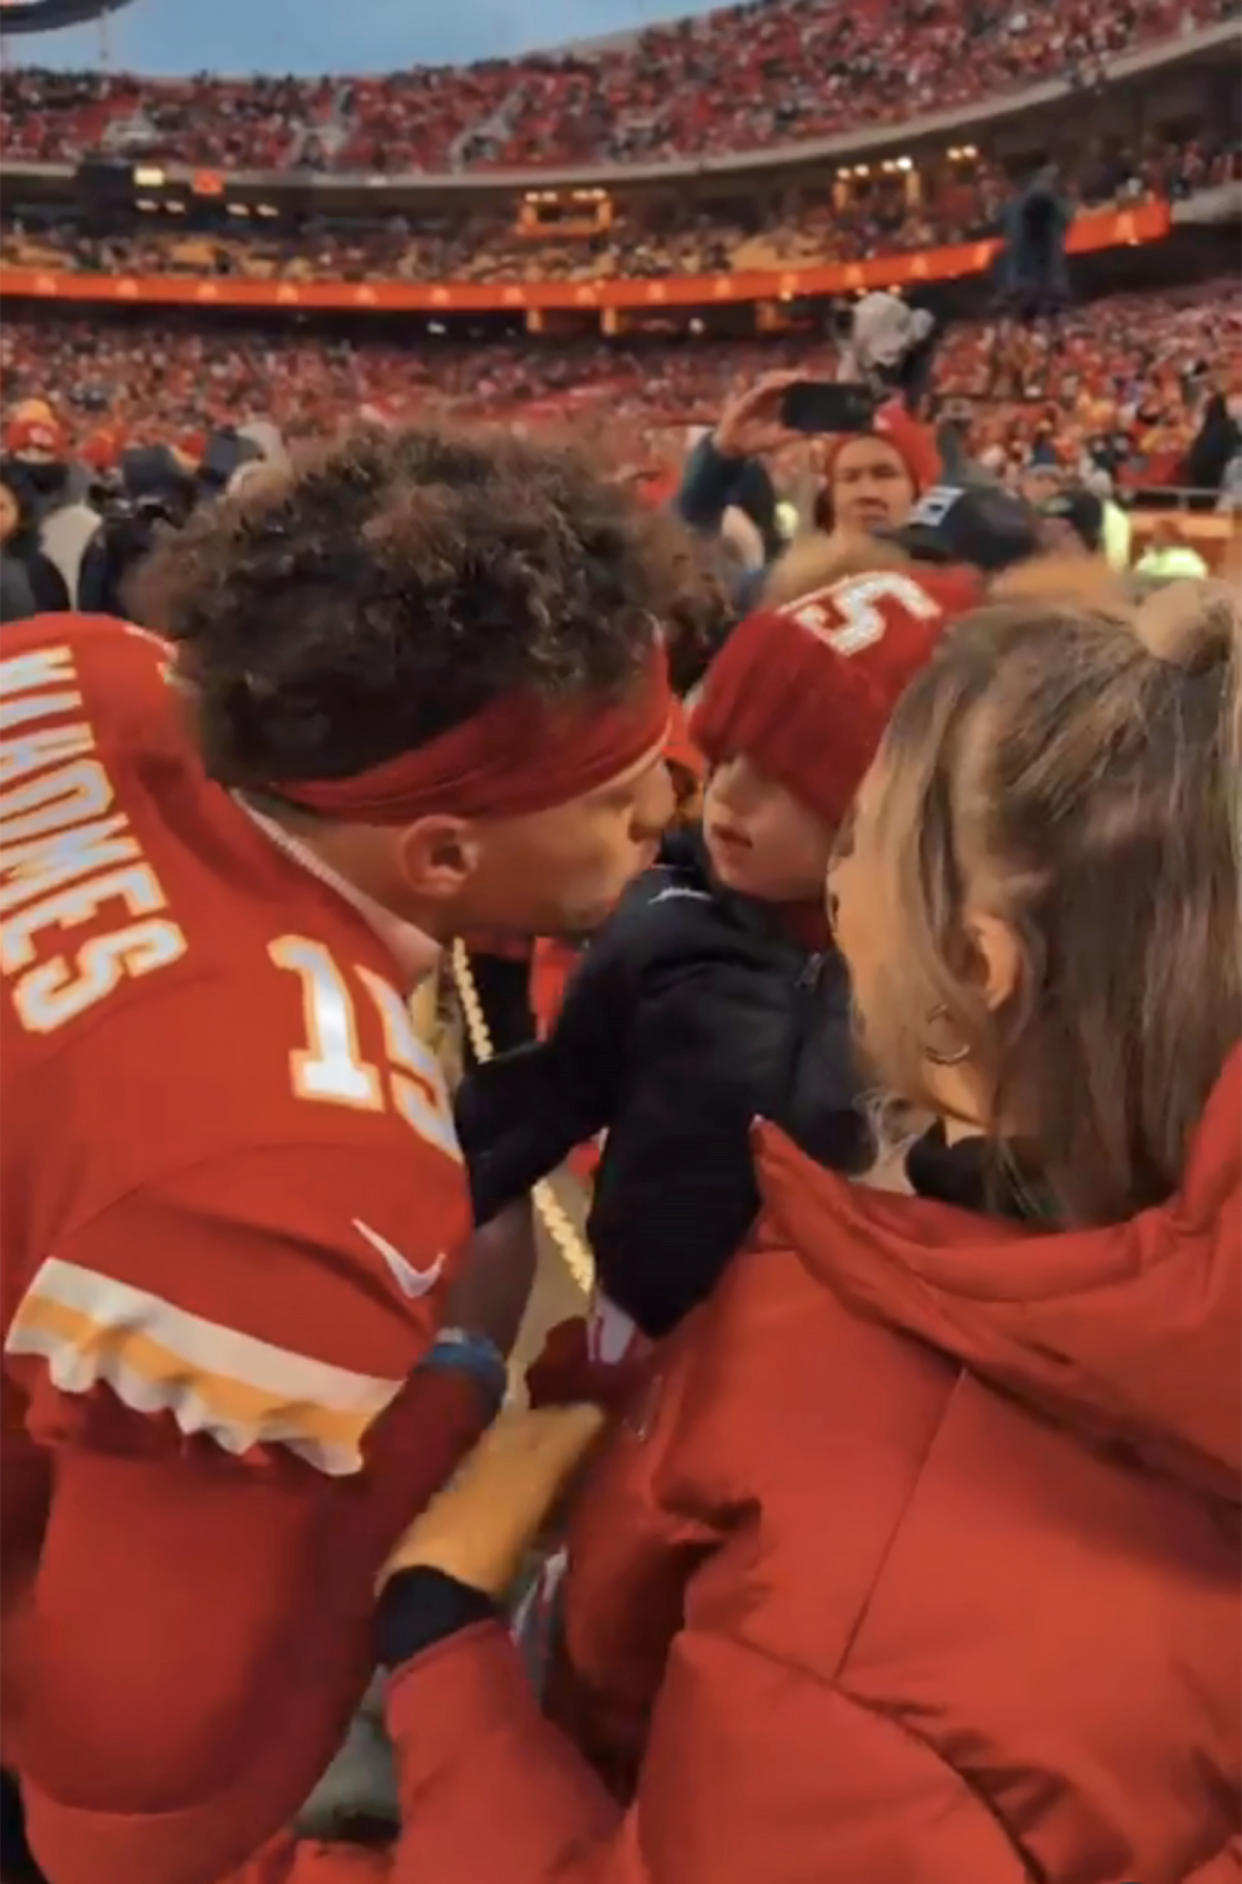 Patrick Mahomes gives his daughter a kiss. (@brittanylynne via Instagram)